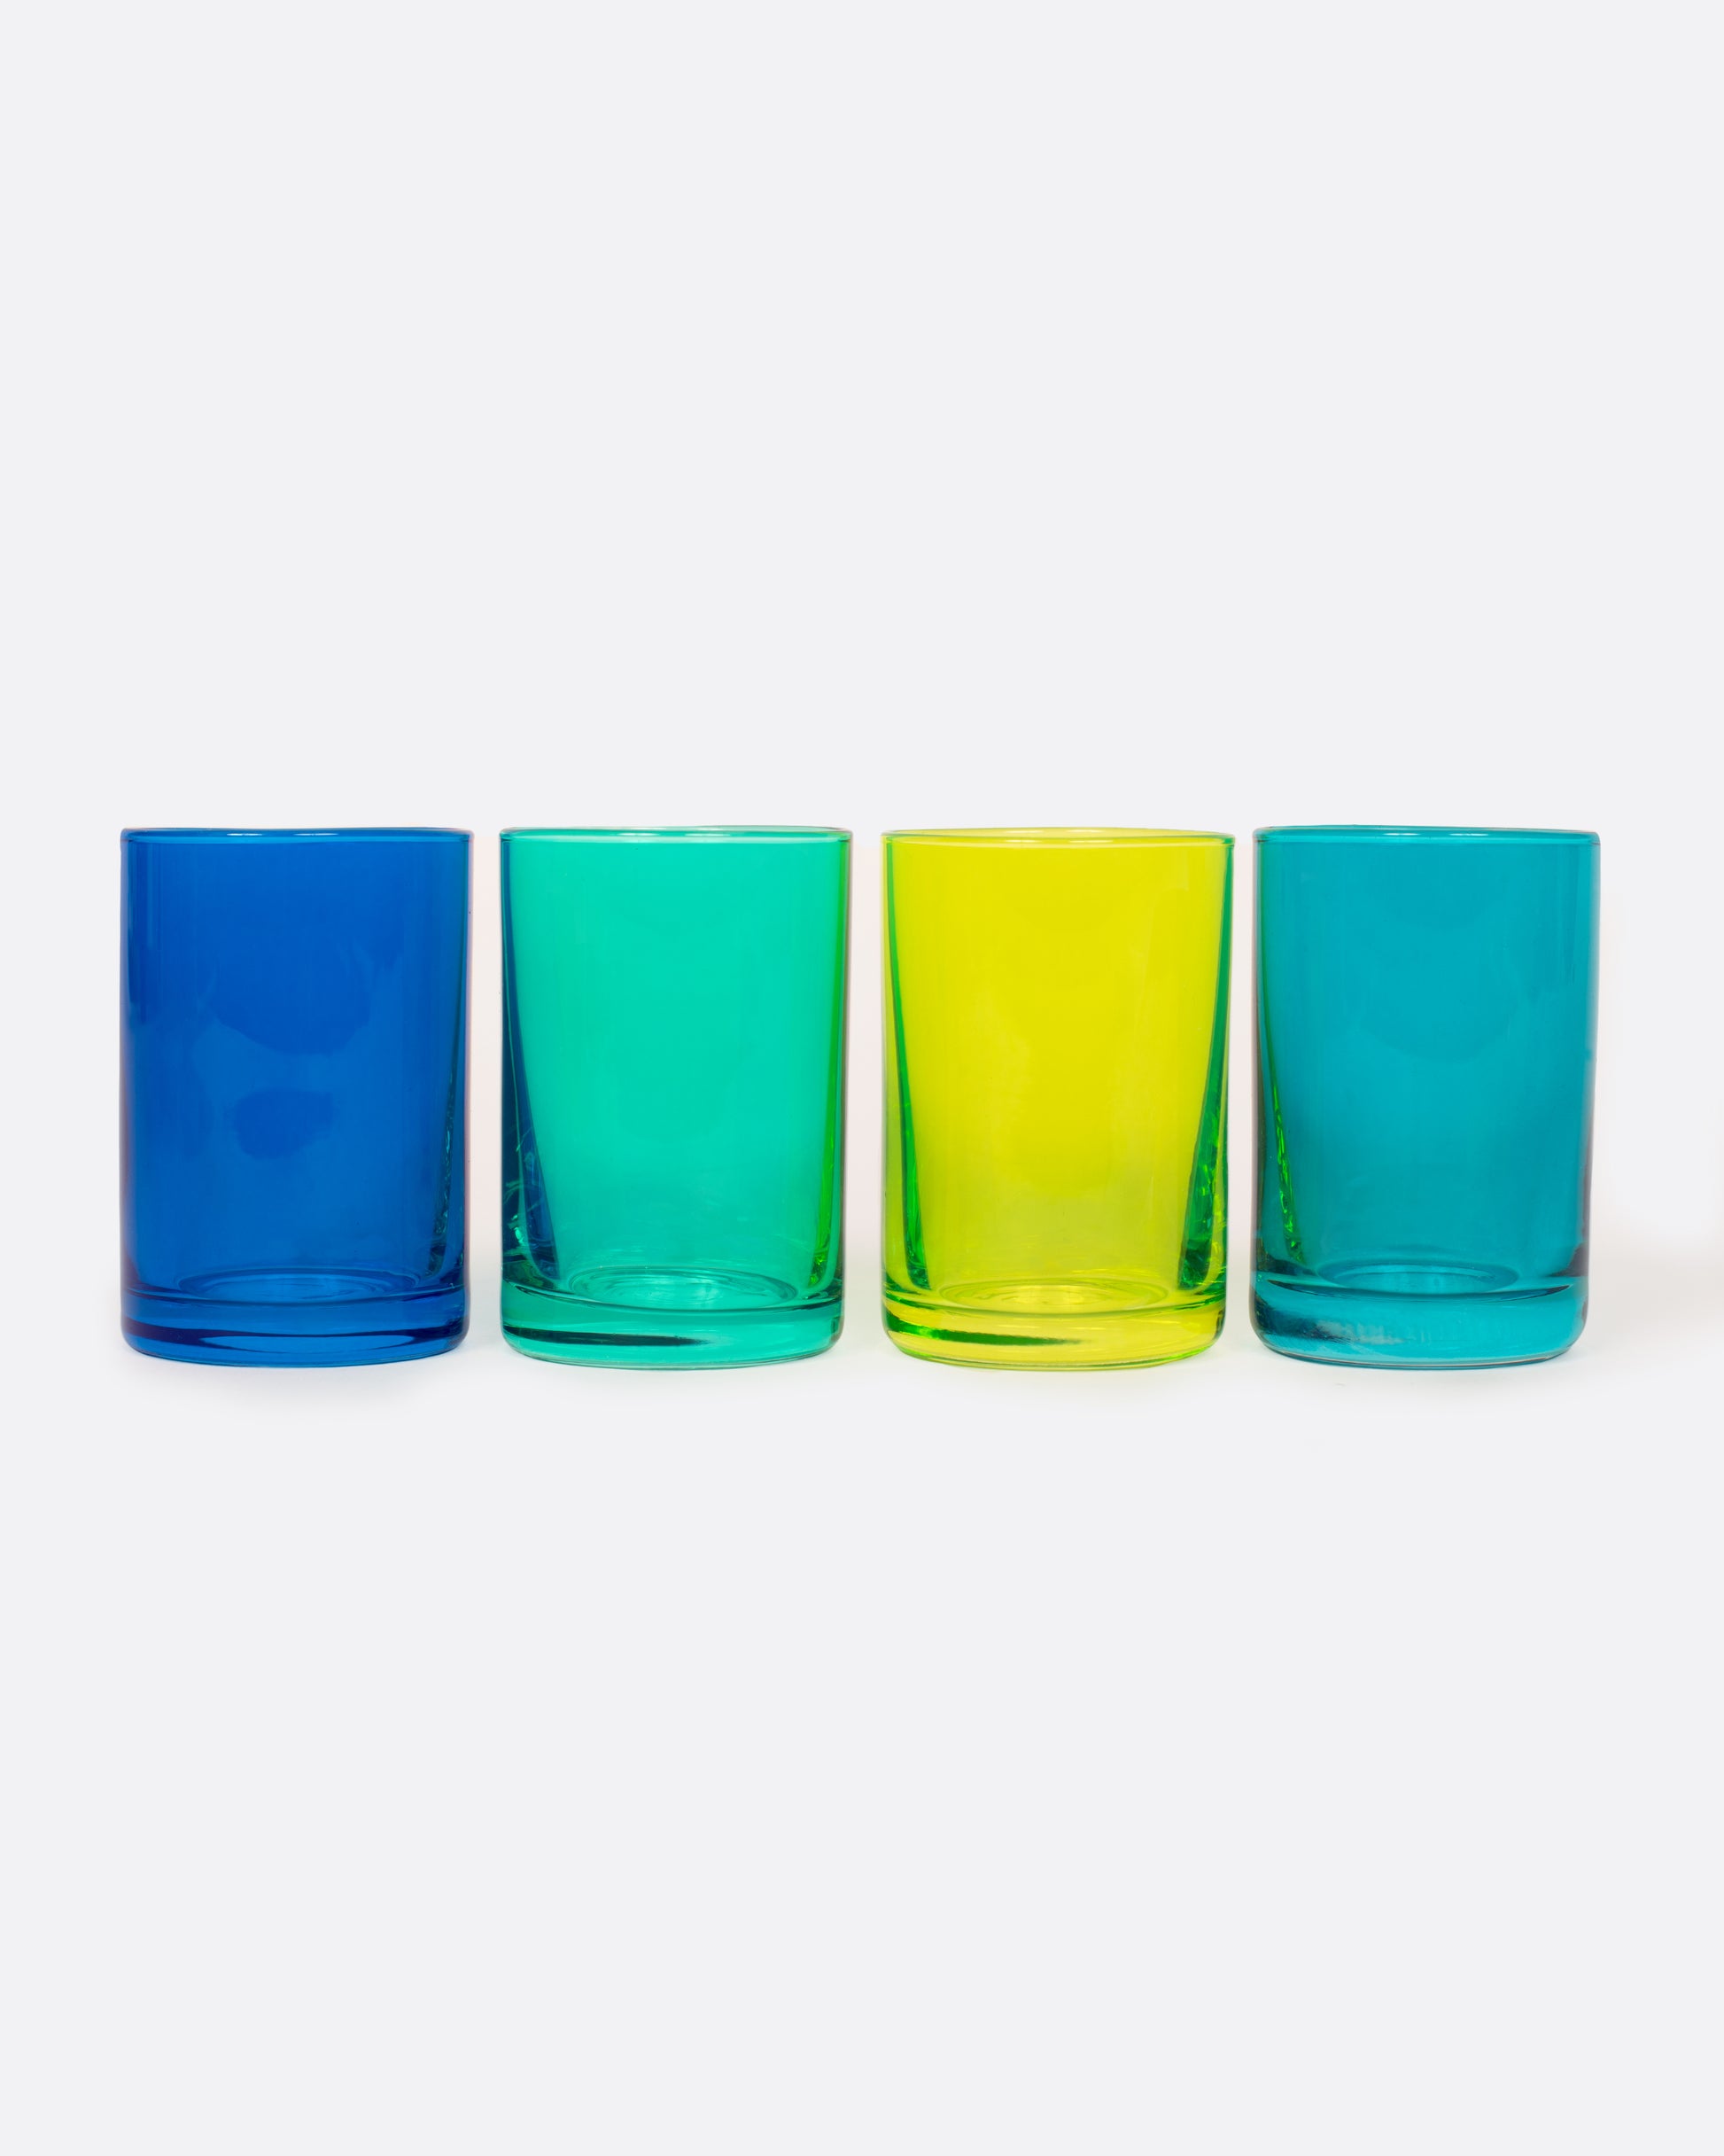 Four shot glasses in shades of green and blue.